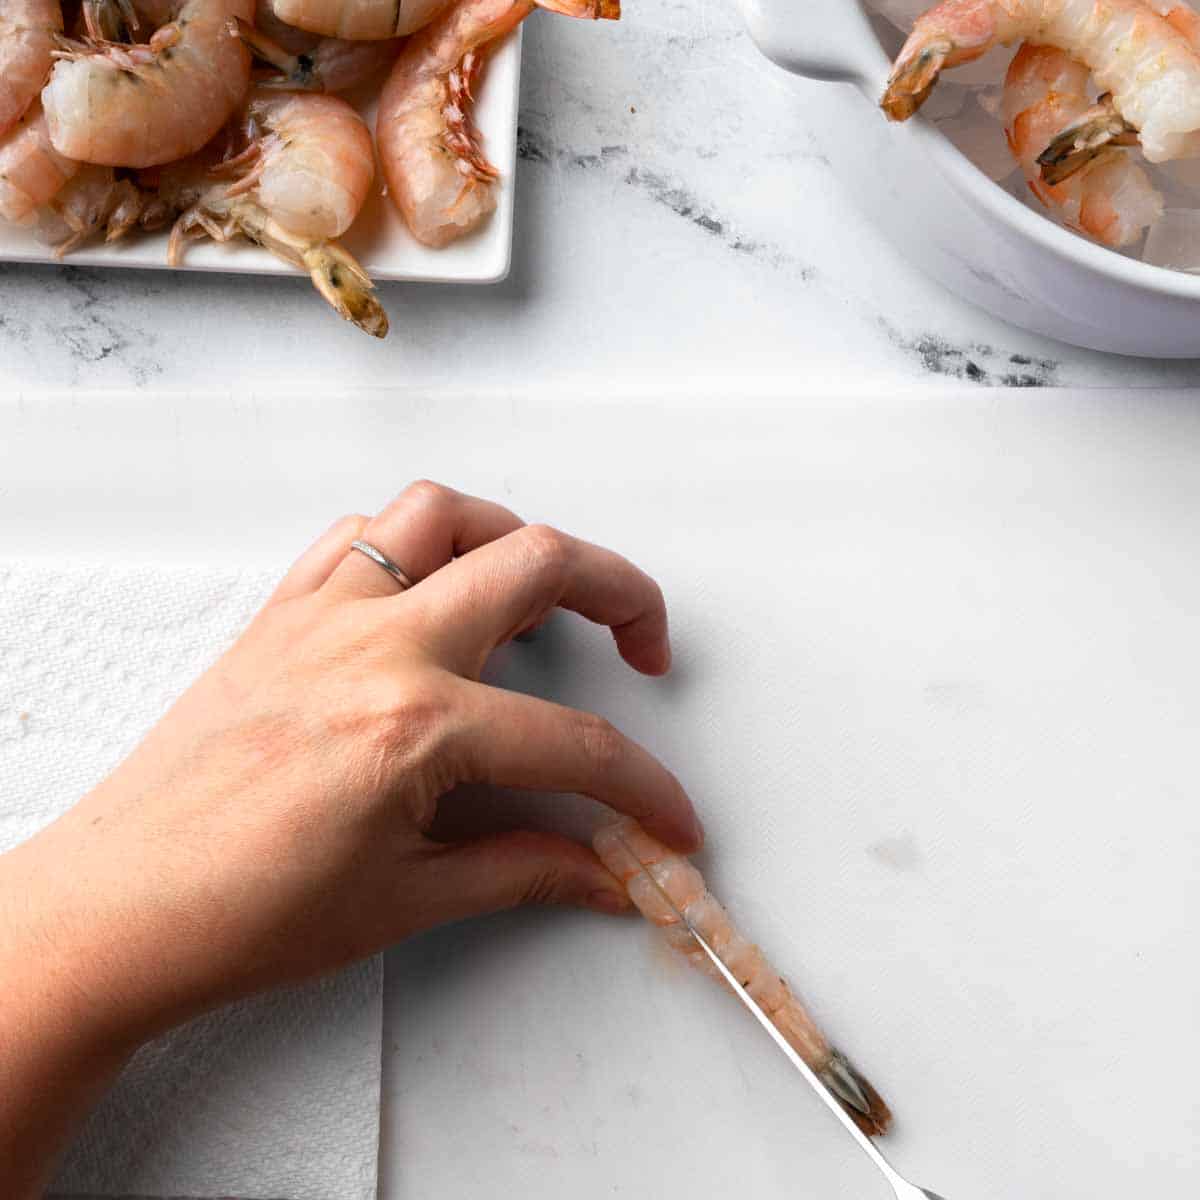 Using a paring knife to cut a slit along the shrimps back.